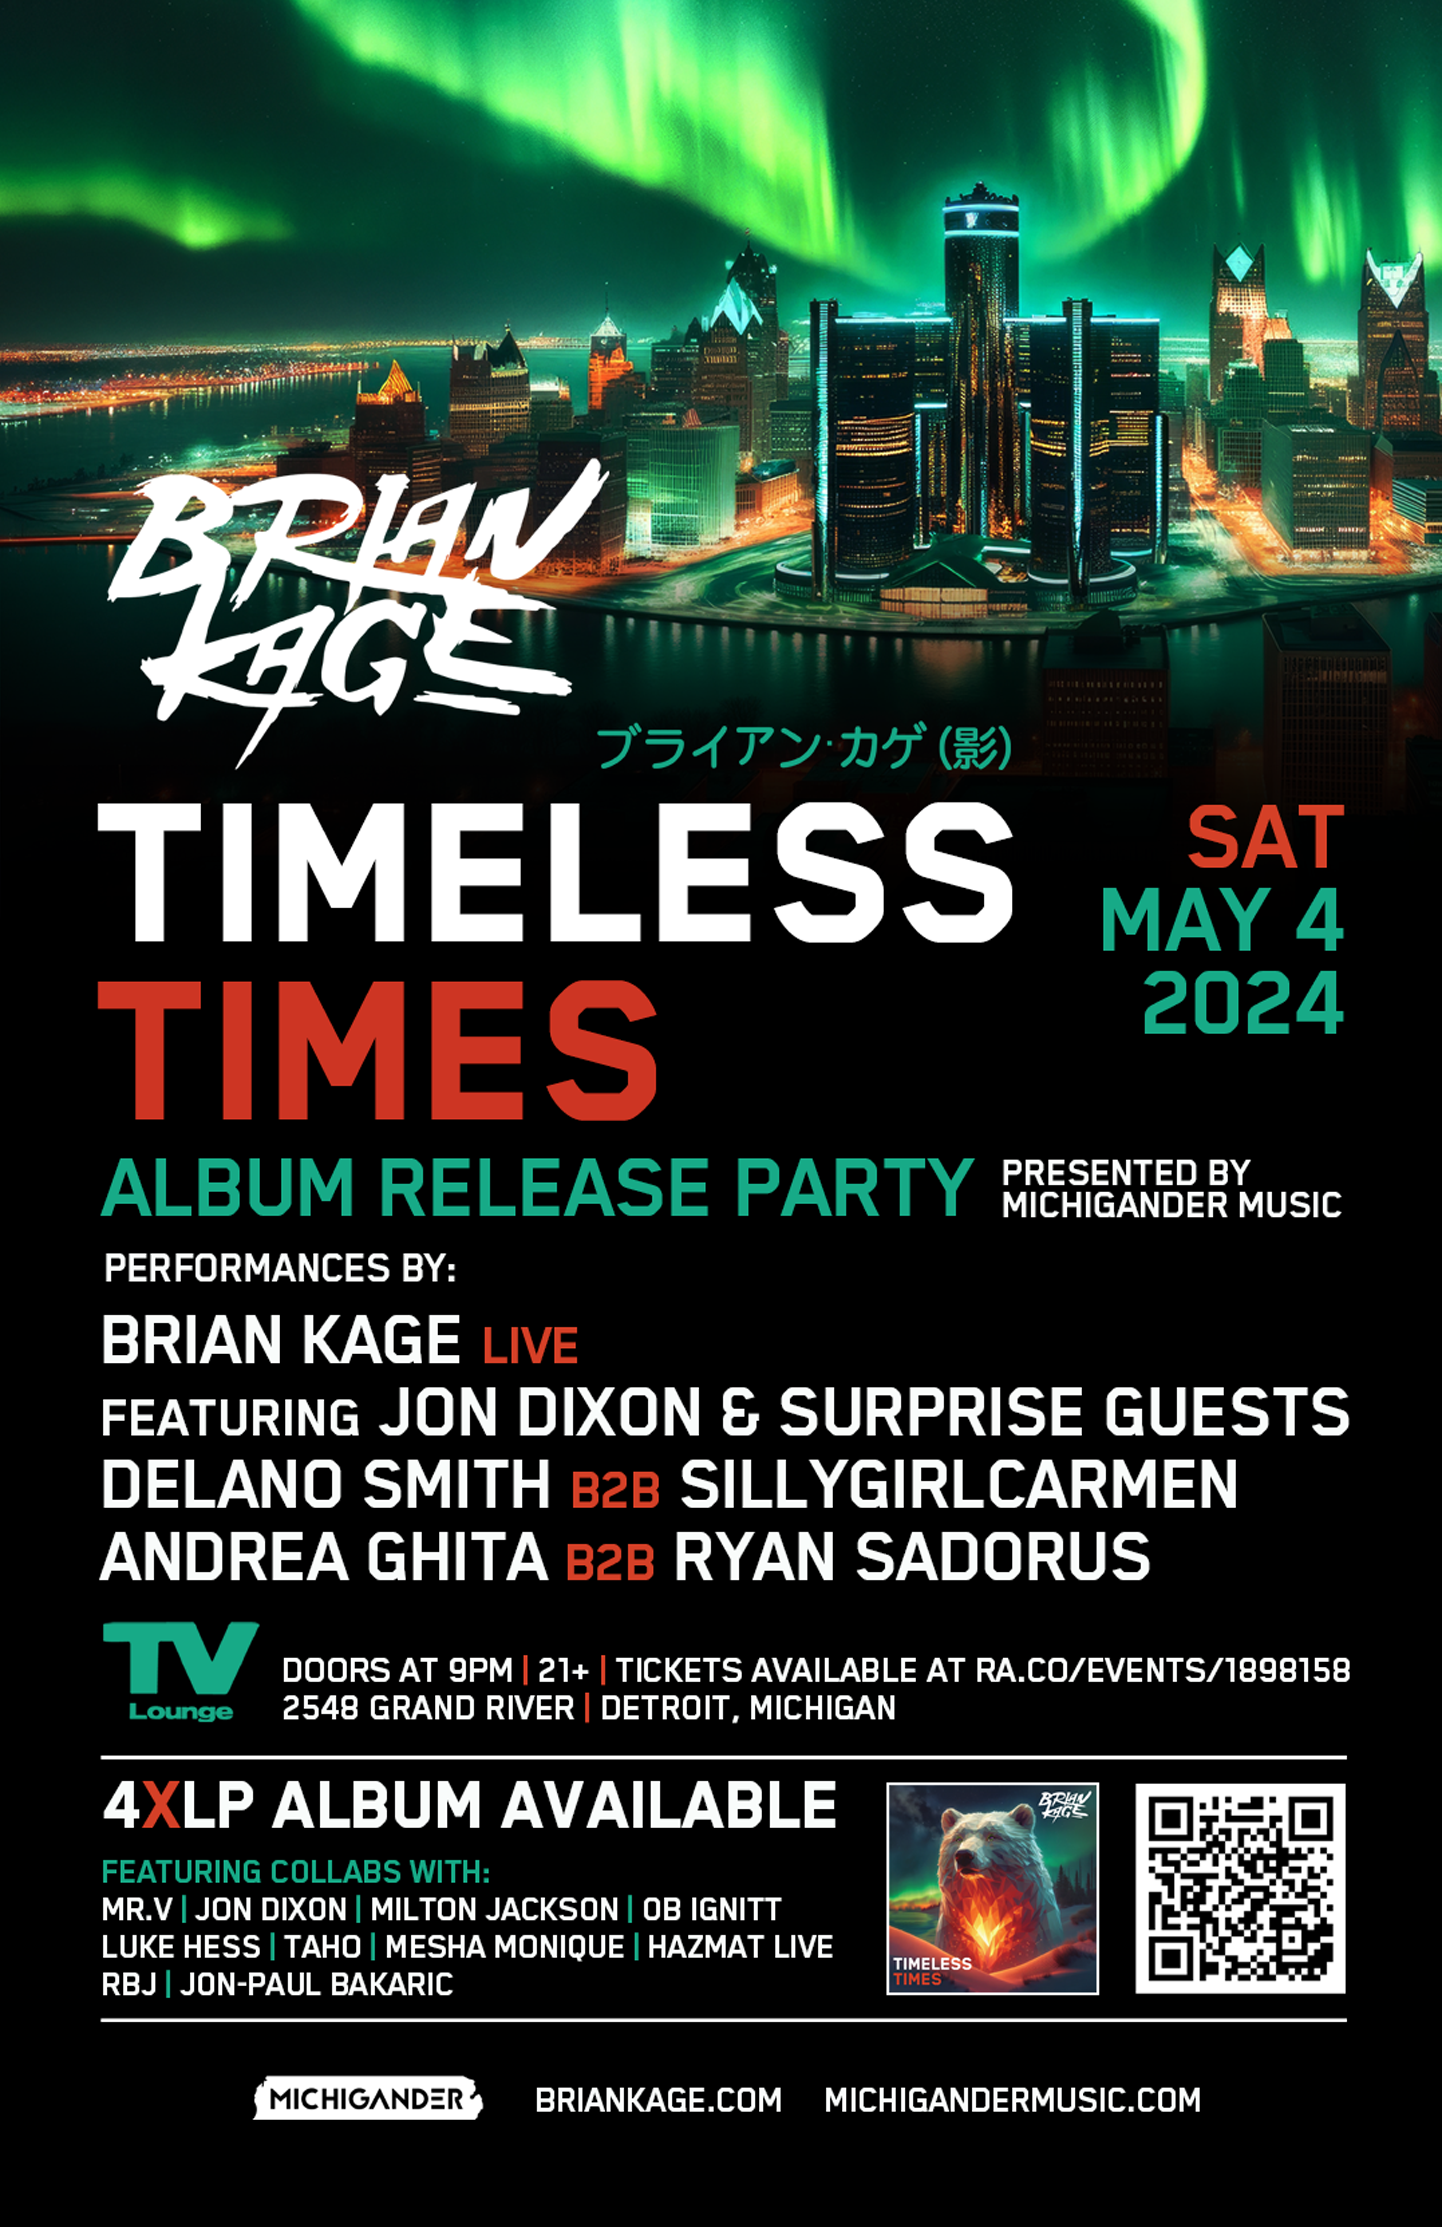 Michigander presents Brian Kage's Timeless Times Album Release Party - Página frontal